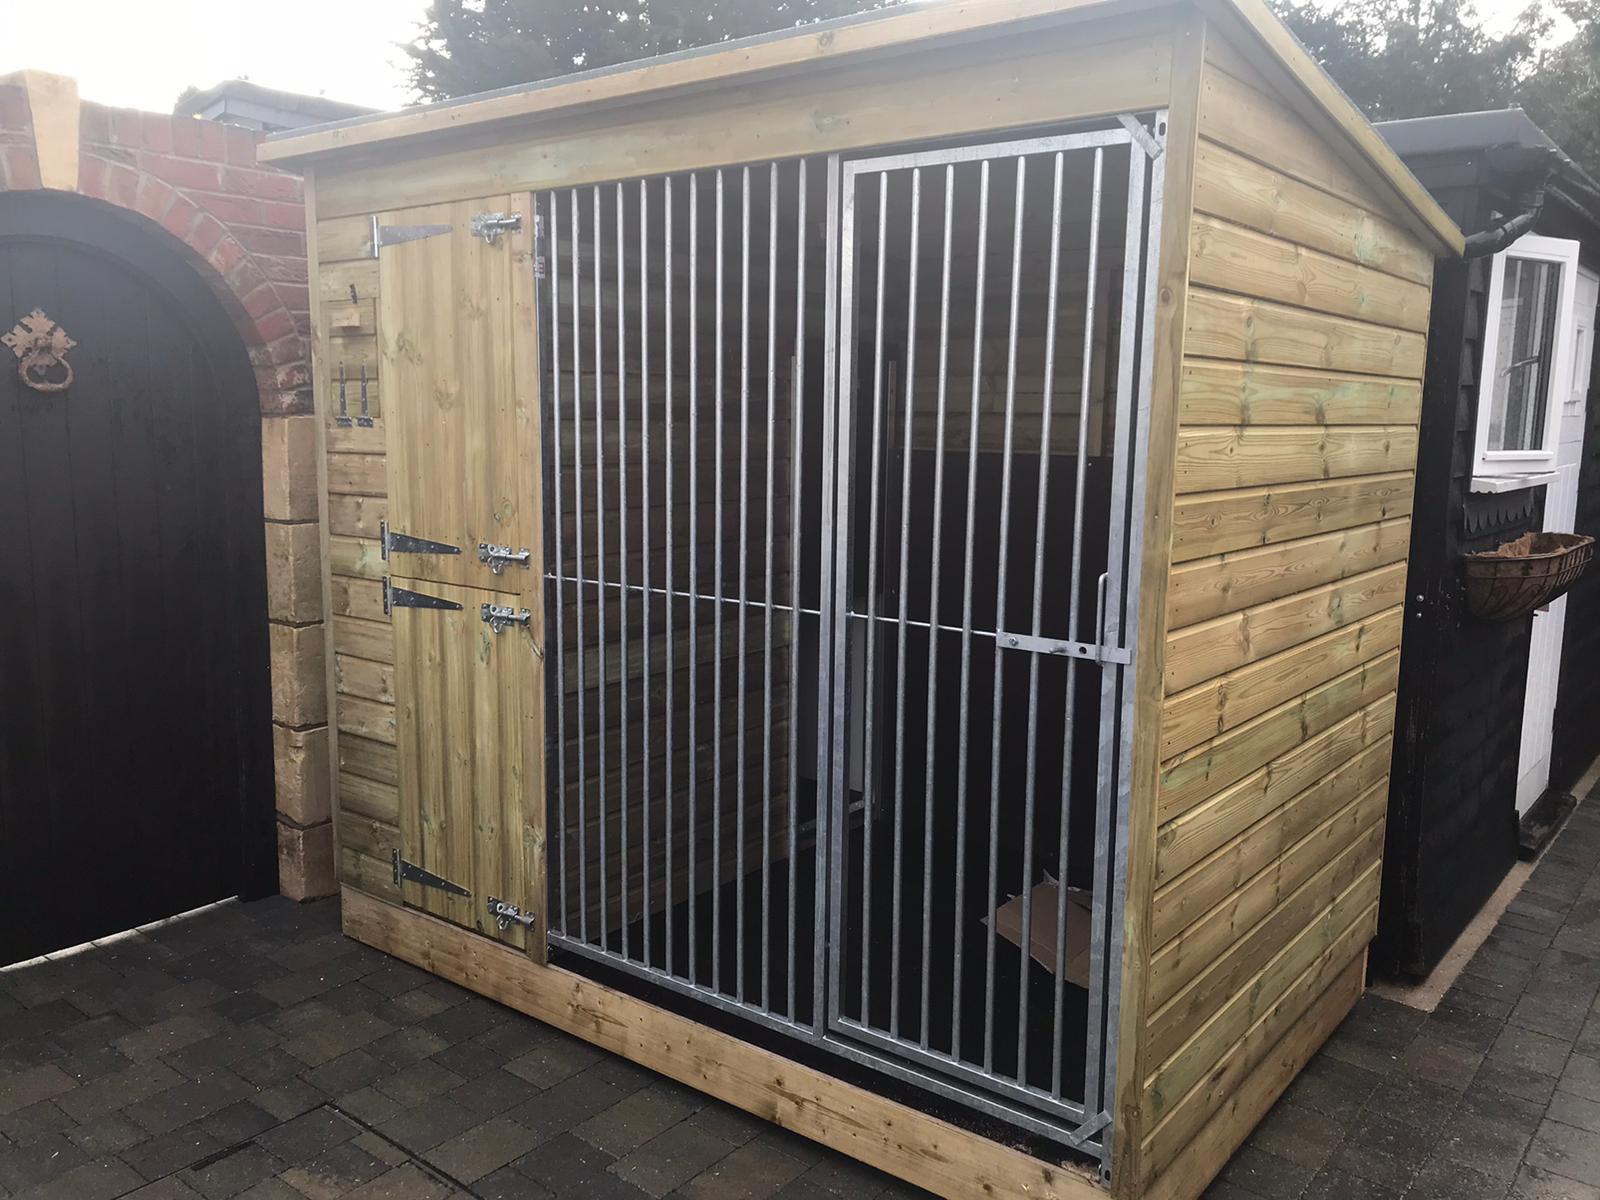 Stapeley Wooden Dog Kennel And Run 10'6ft (wide) x 6ft (deep) x 6'6ft (high)